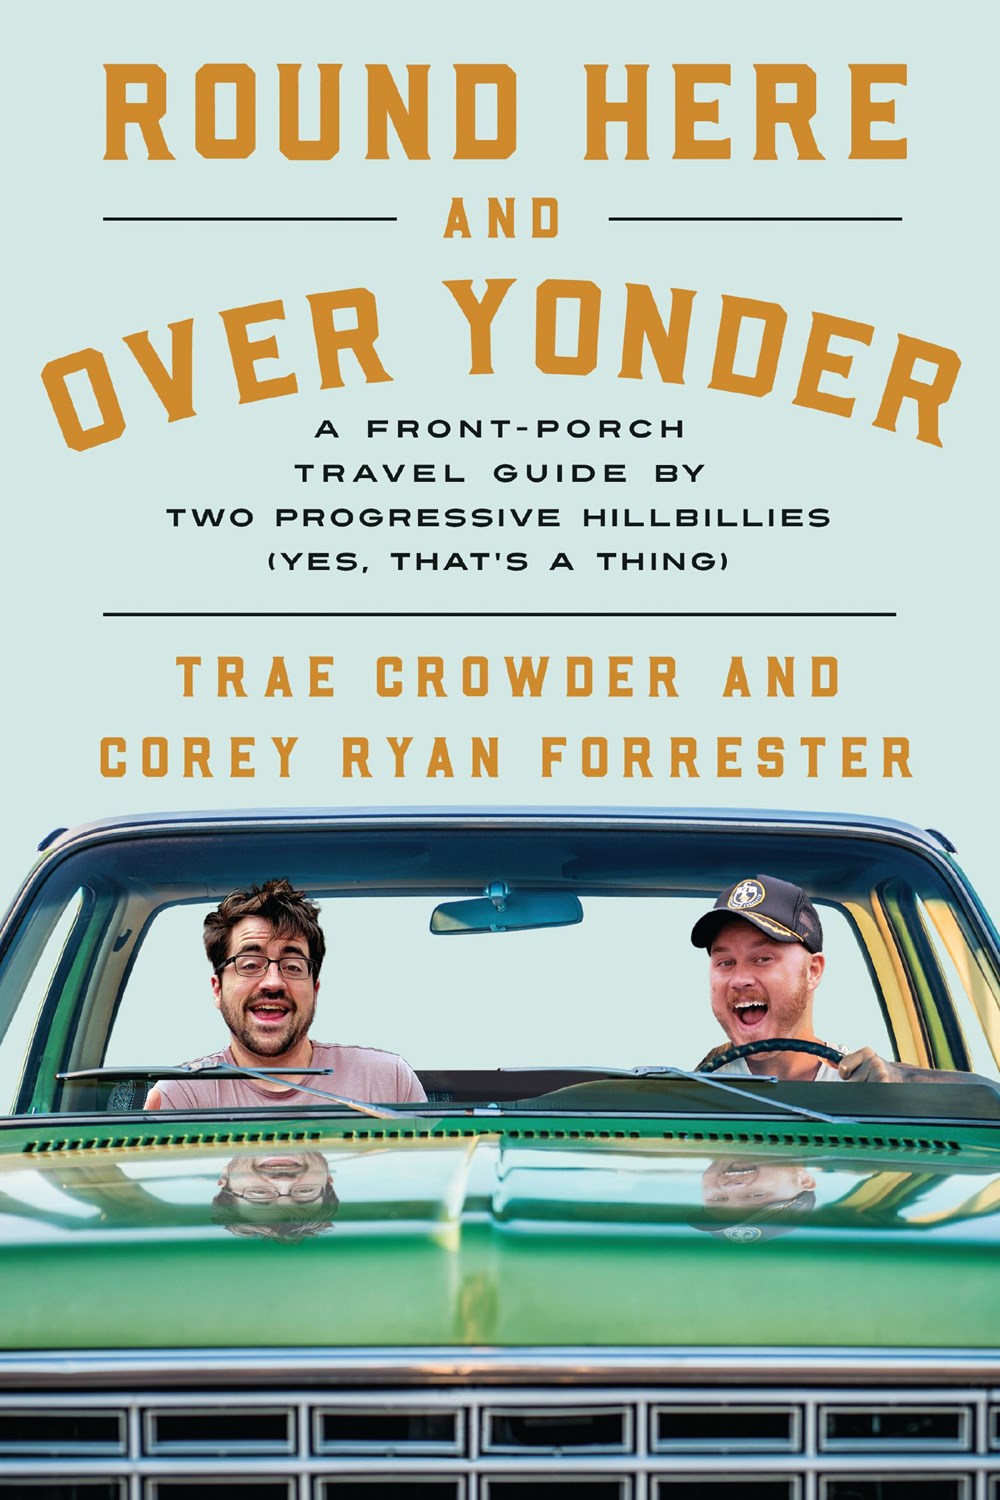 Round Here and Over Yonder: A Front Porch Travel Guide by Two Progressive Hillbillies